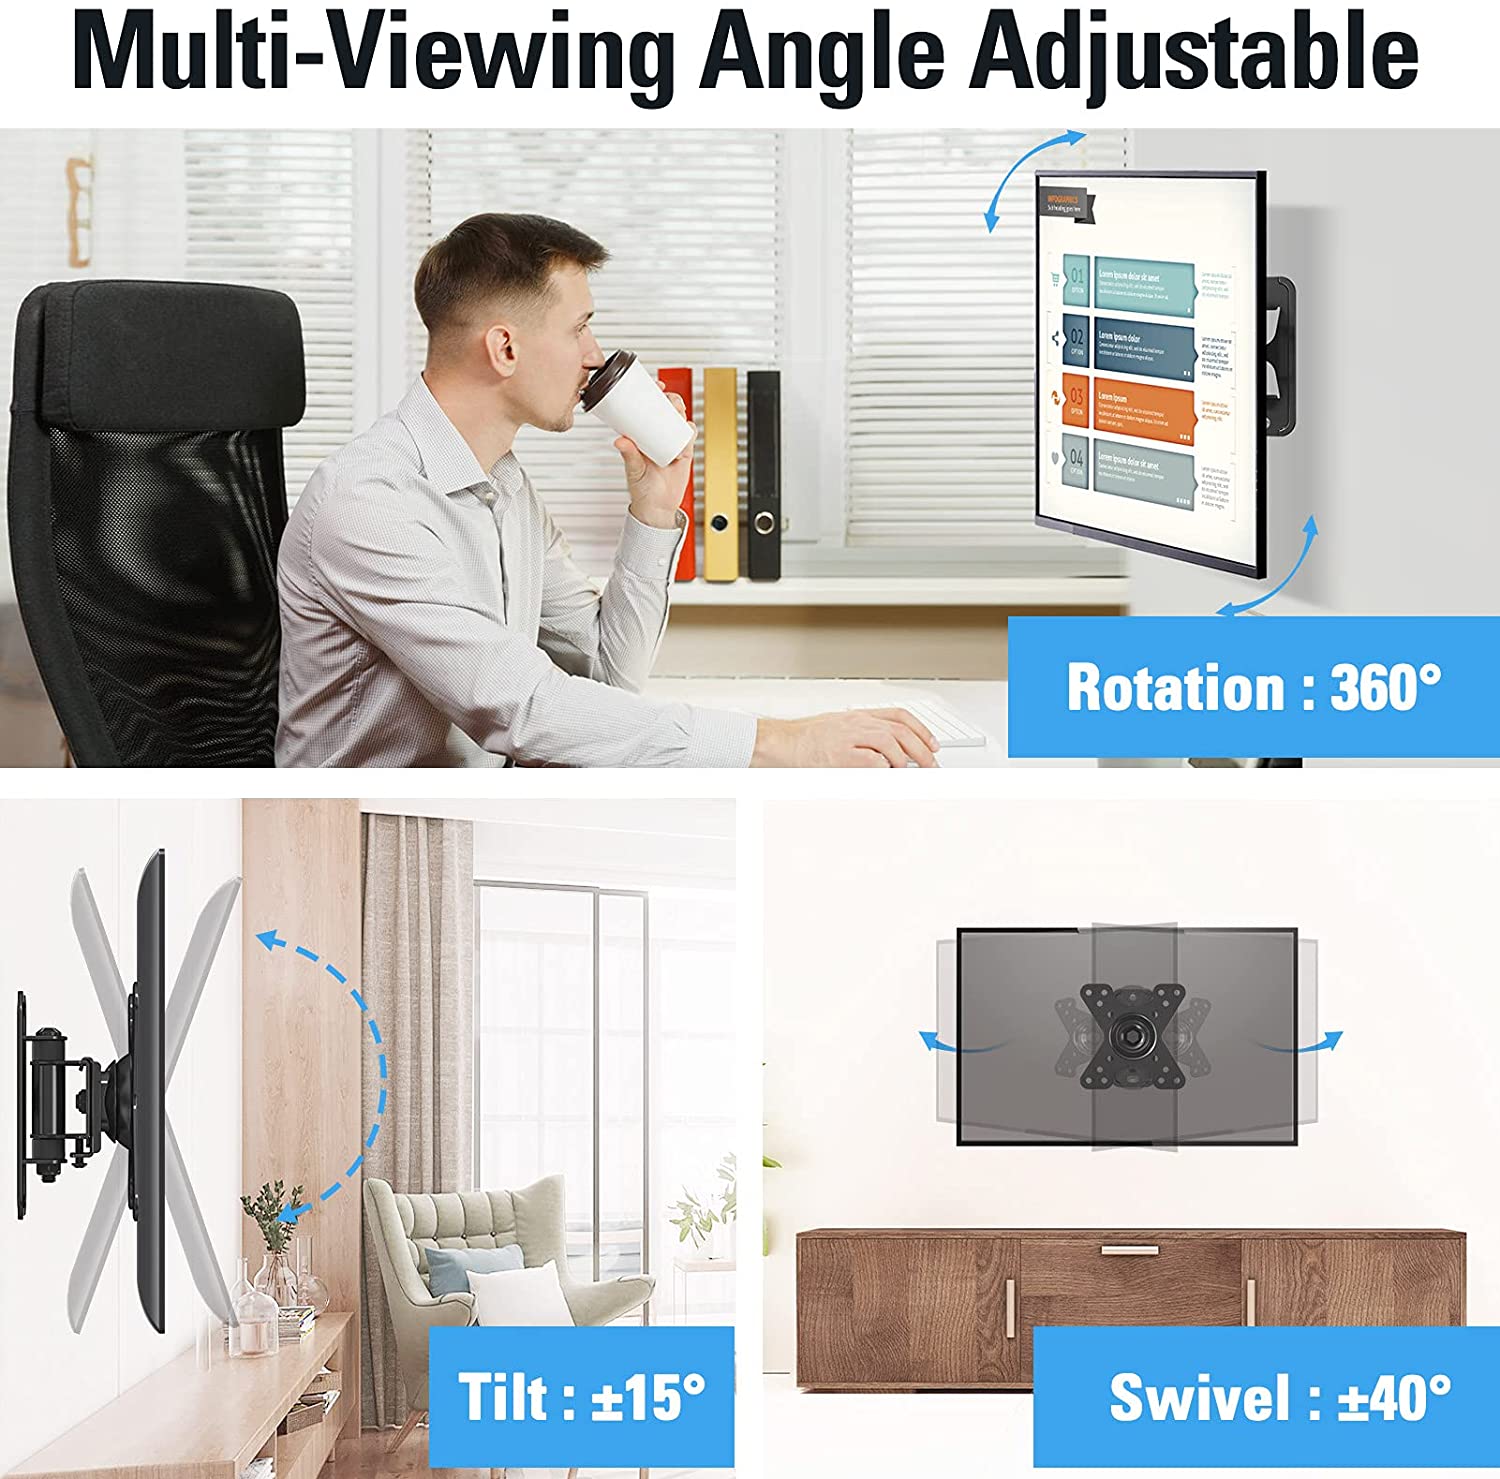 rotatable TV mount for multi-viewing angle